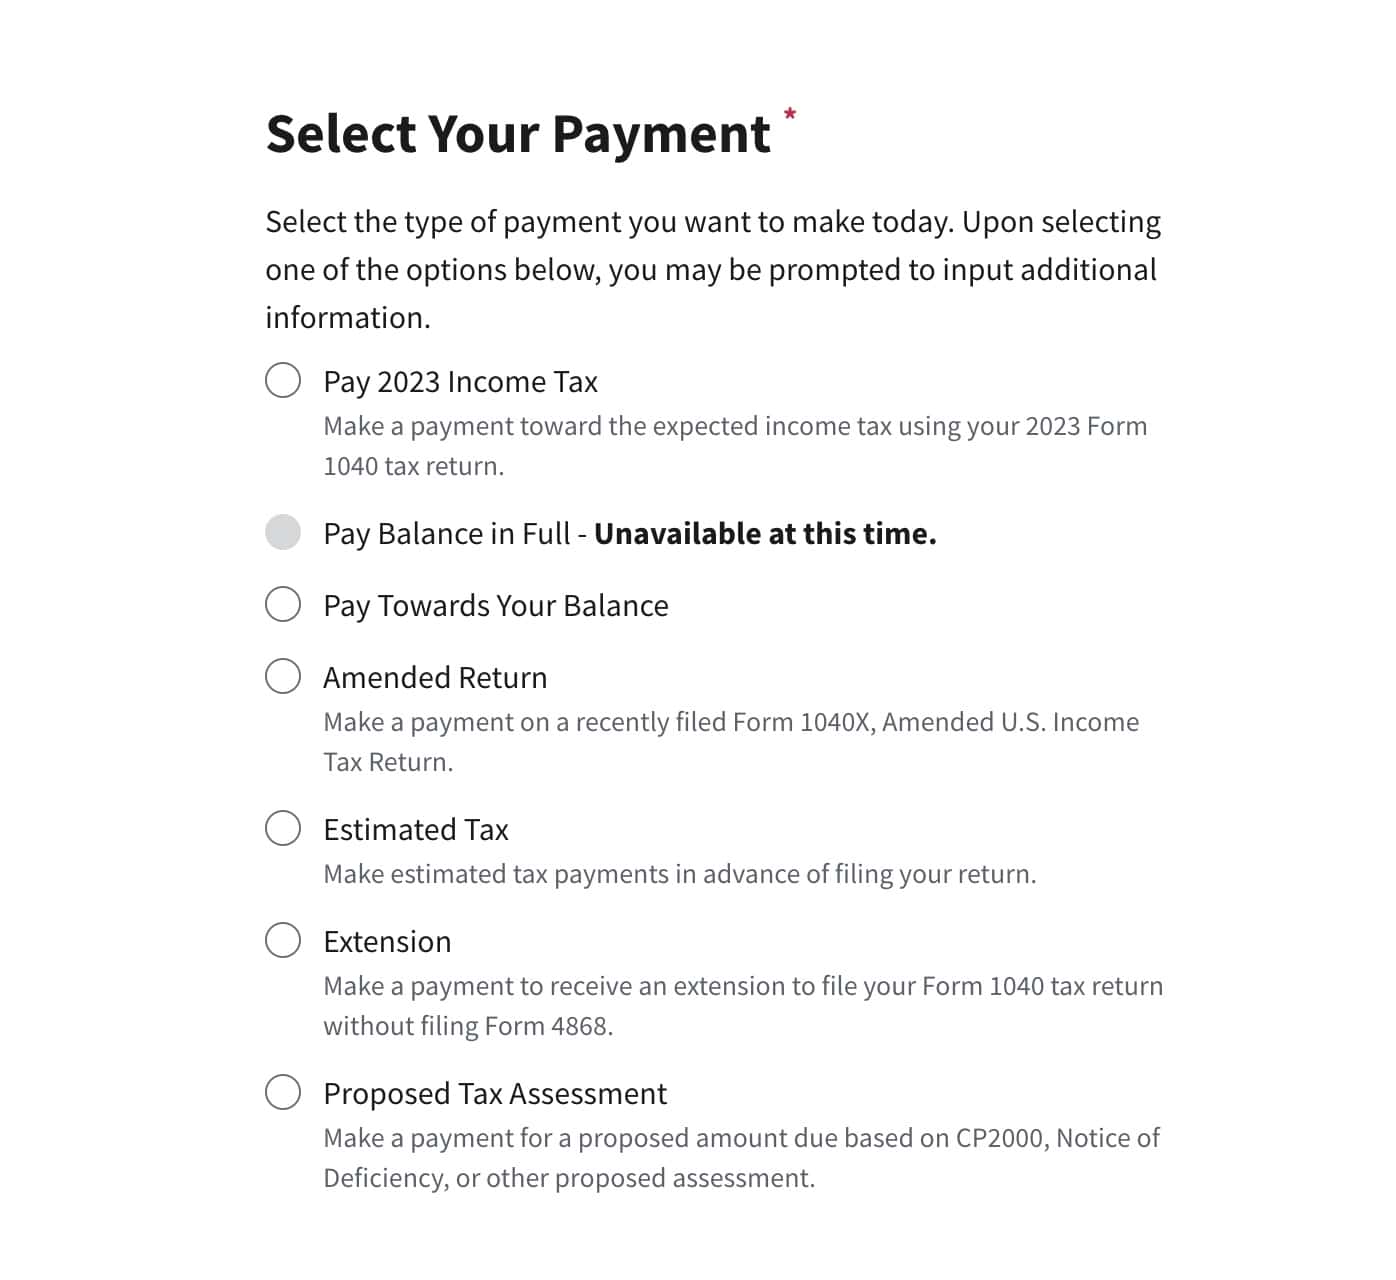 select the tax payment option